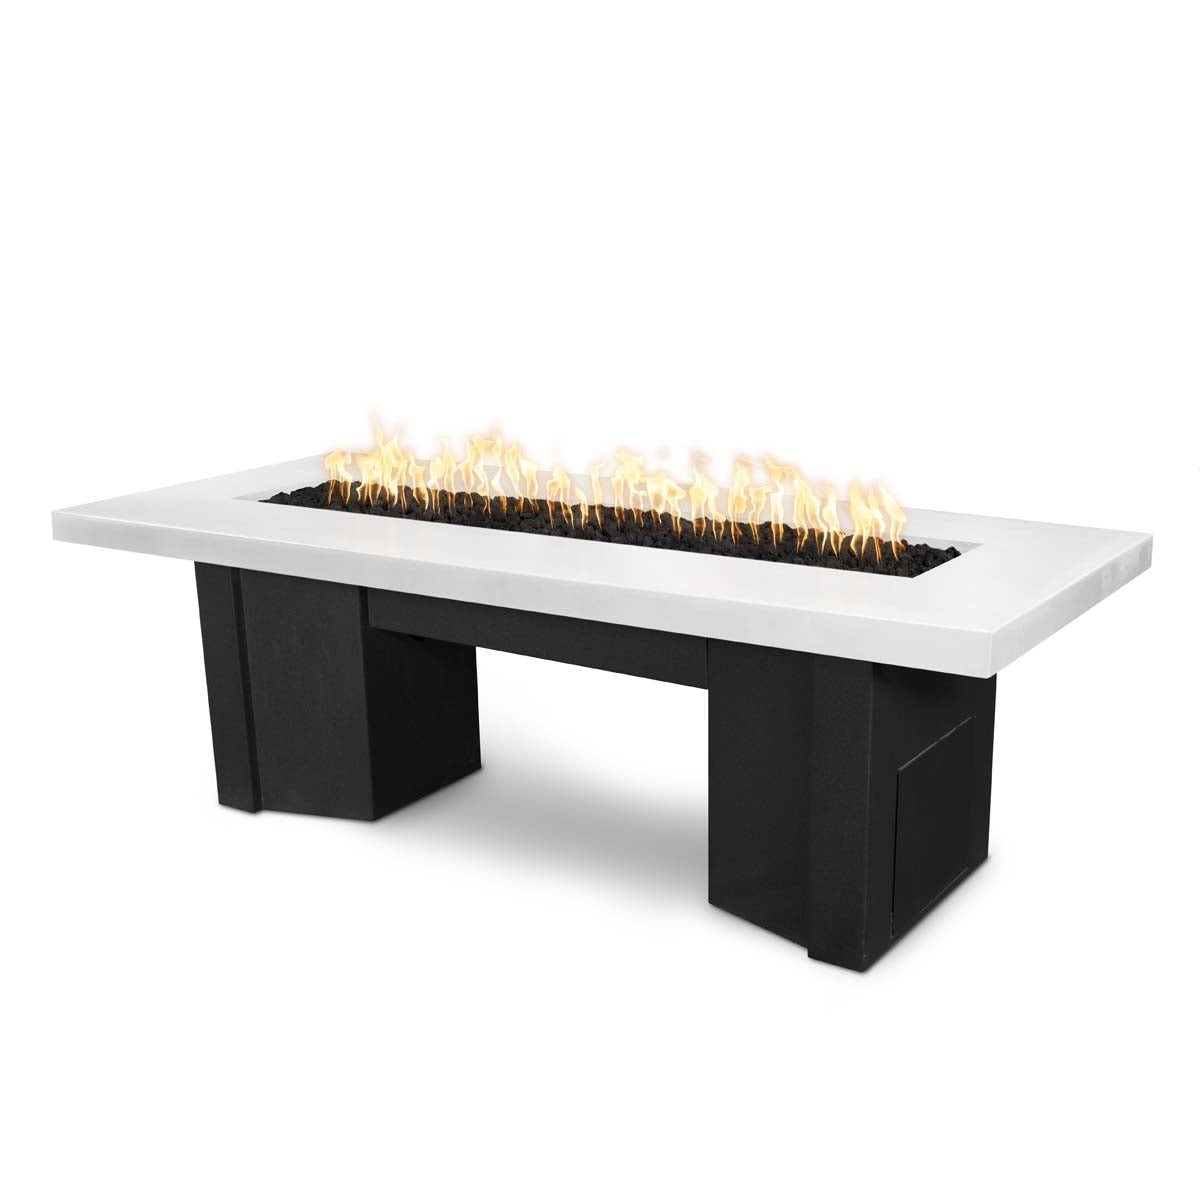 The Outdoor Plus Rectangular Alameda 78" Black & White Powder Coated Natural Gas Fire Pit with Flame Sense with Spark Ignition